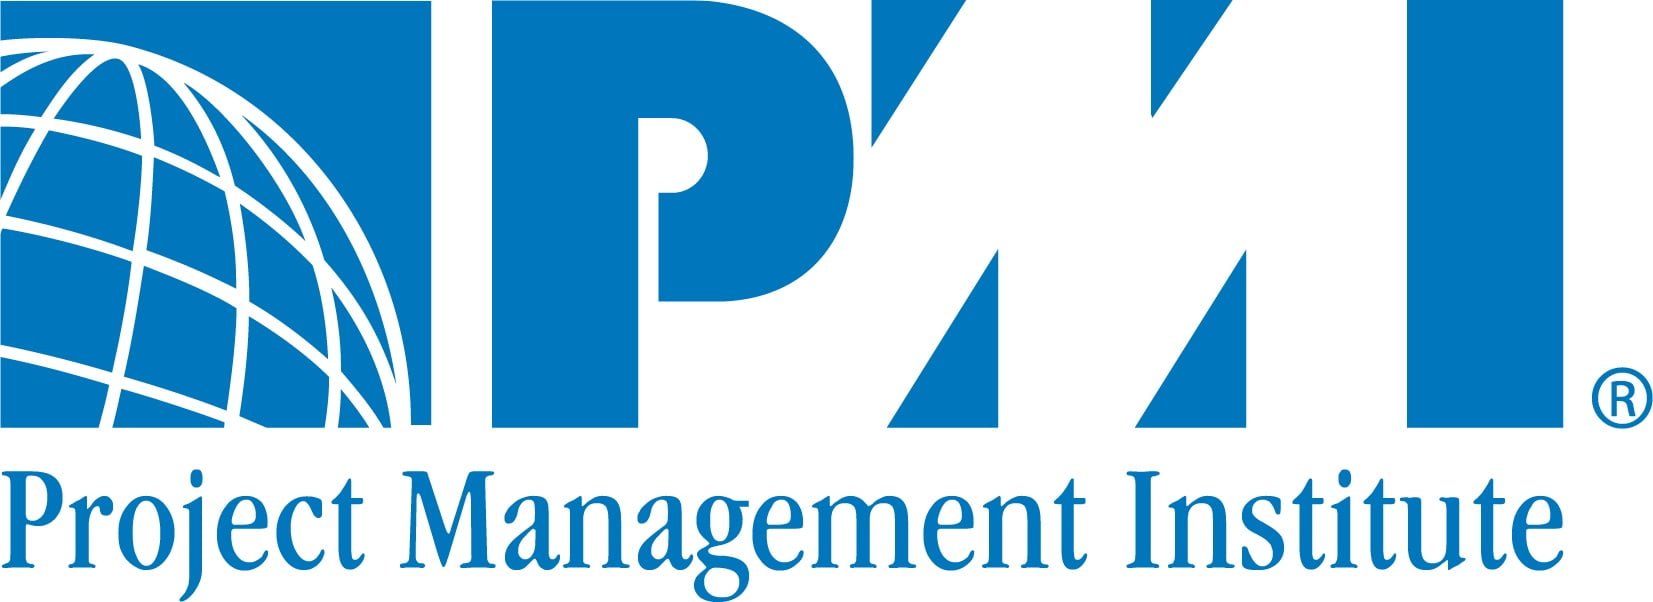 PMP Certified Project Manager Salaries Continue to Outpace Non-Certified Peers